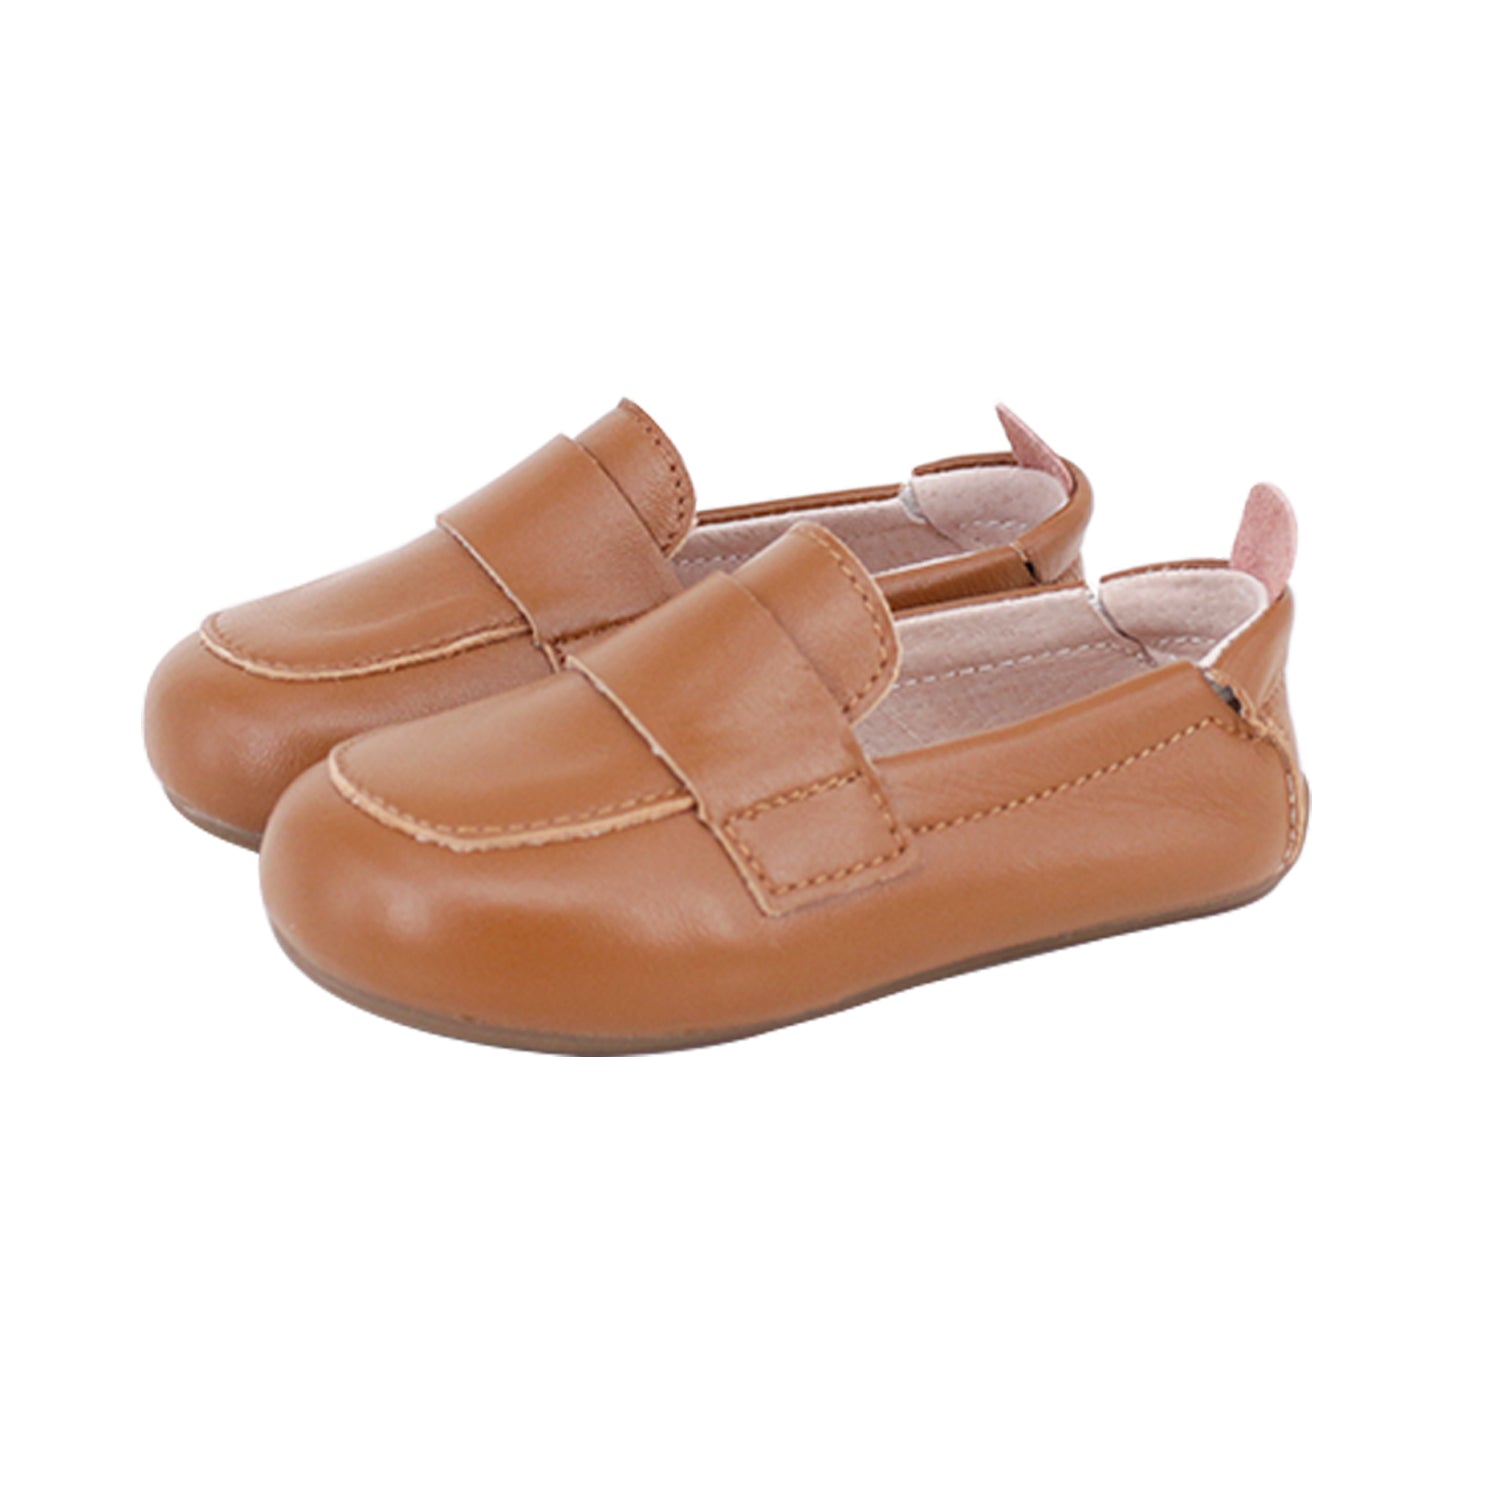 SKEANIE Shoes - | Bunting Booties, | for AU Oliver & Shoes Tan Leather Socks Walker Baby Pre Loafers Kids